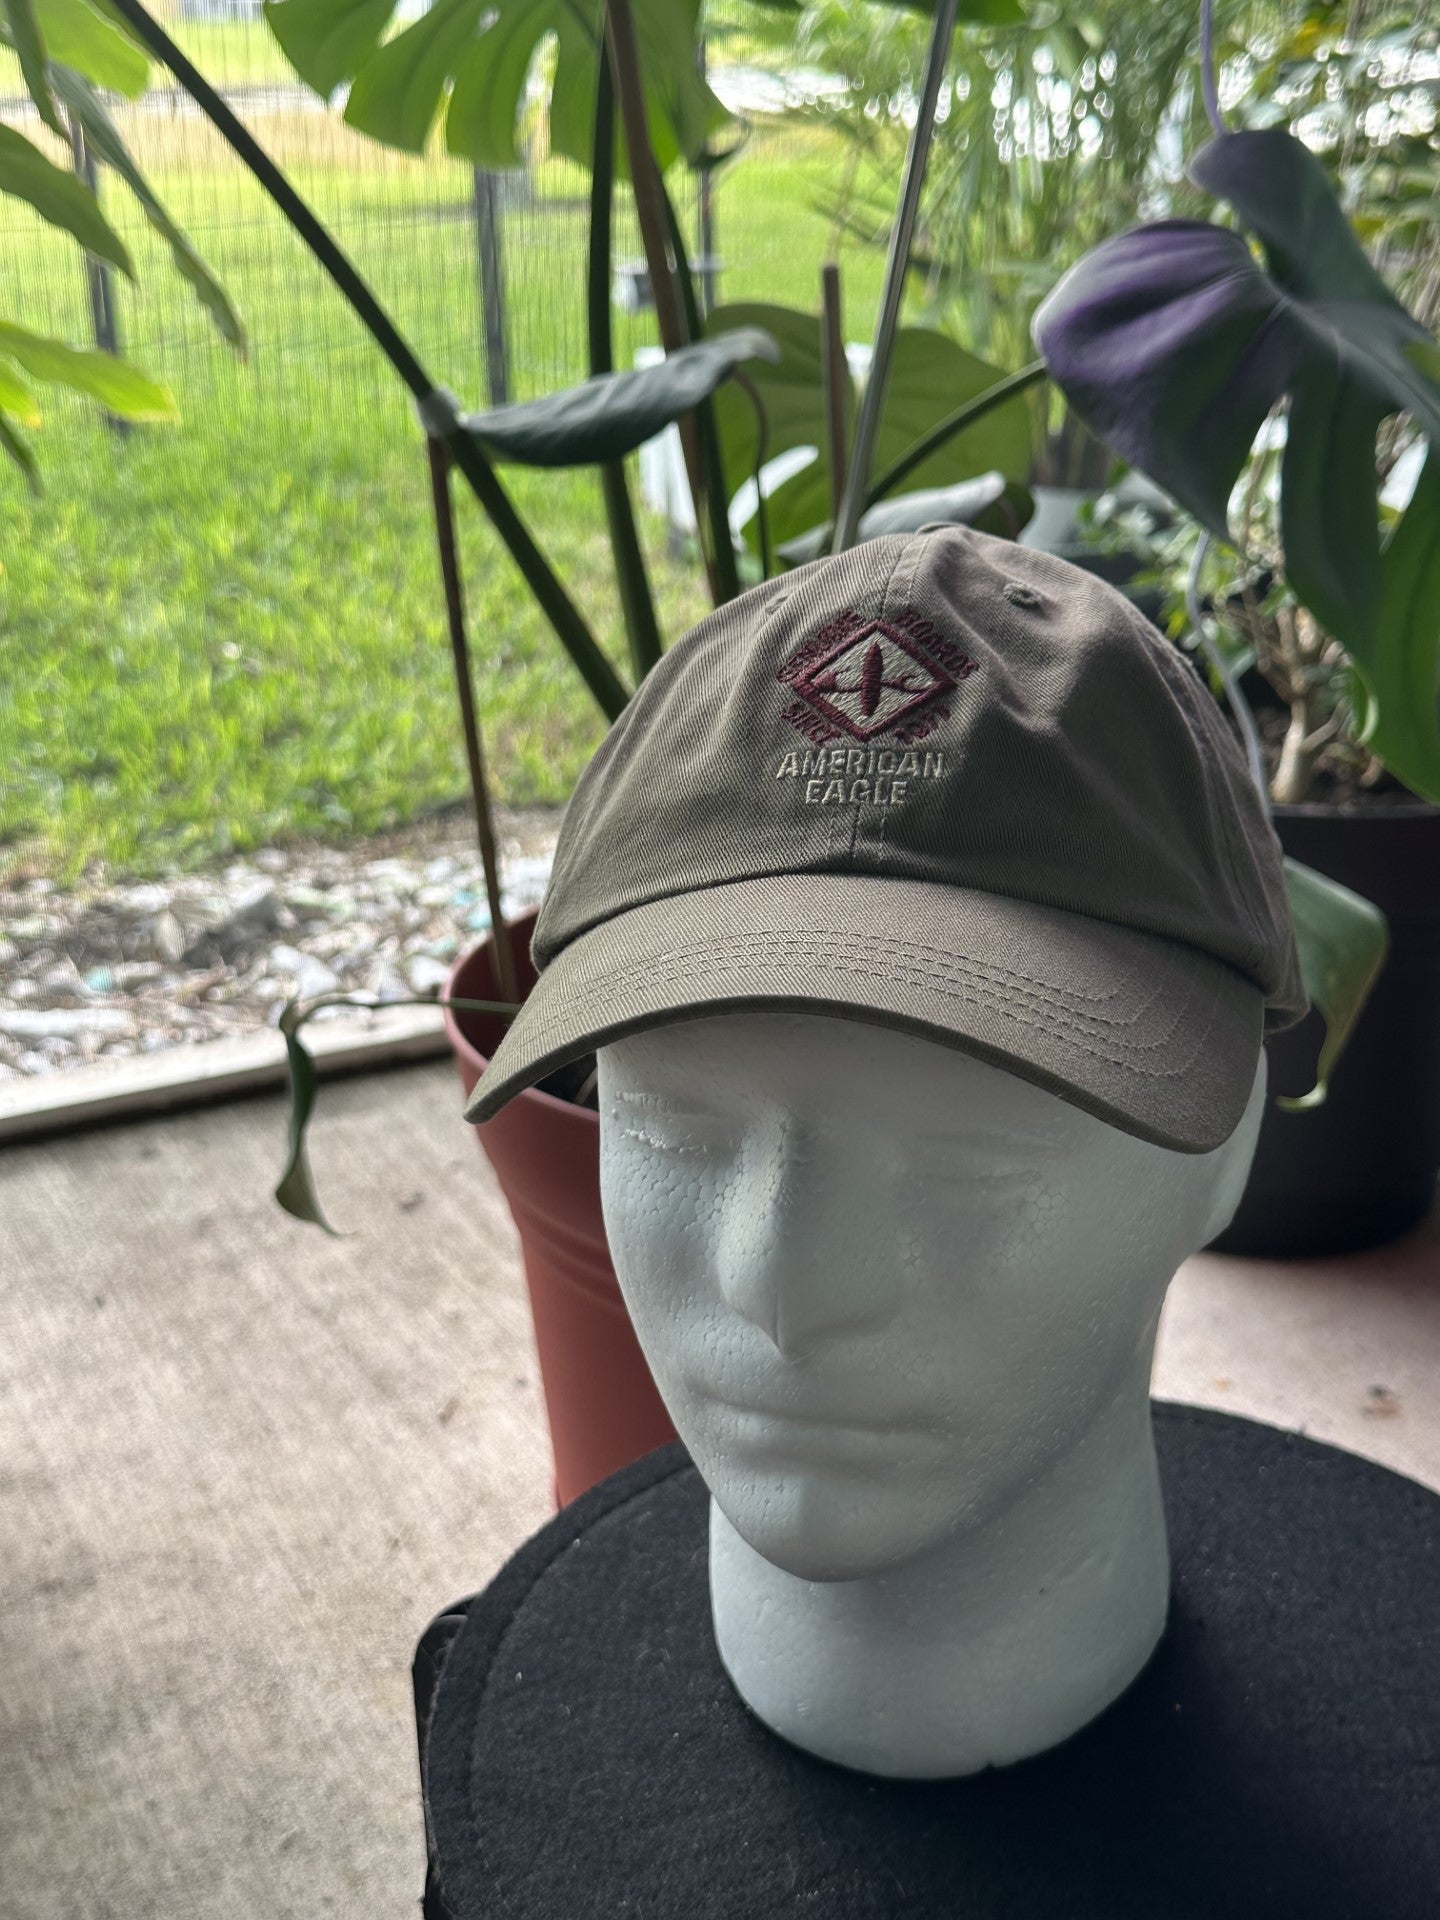 American Eagle Unisex Hat Strap Back Brown/ Cotton Casual Embroidered Logo AE on Back